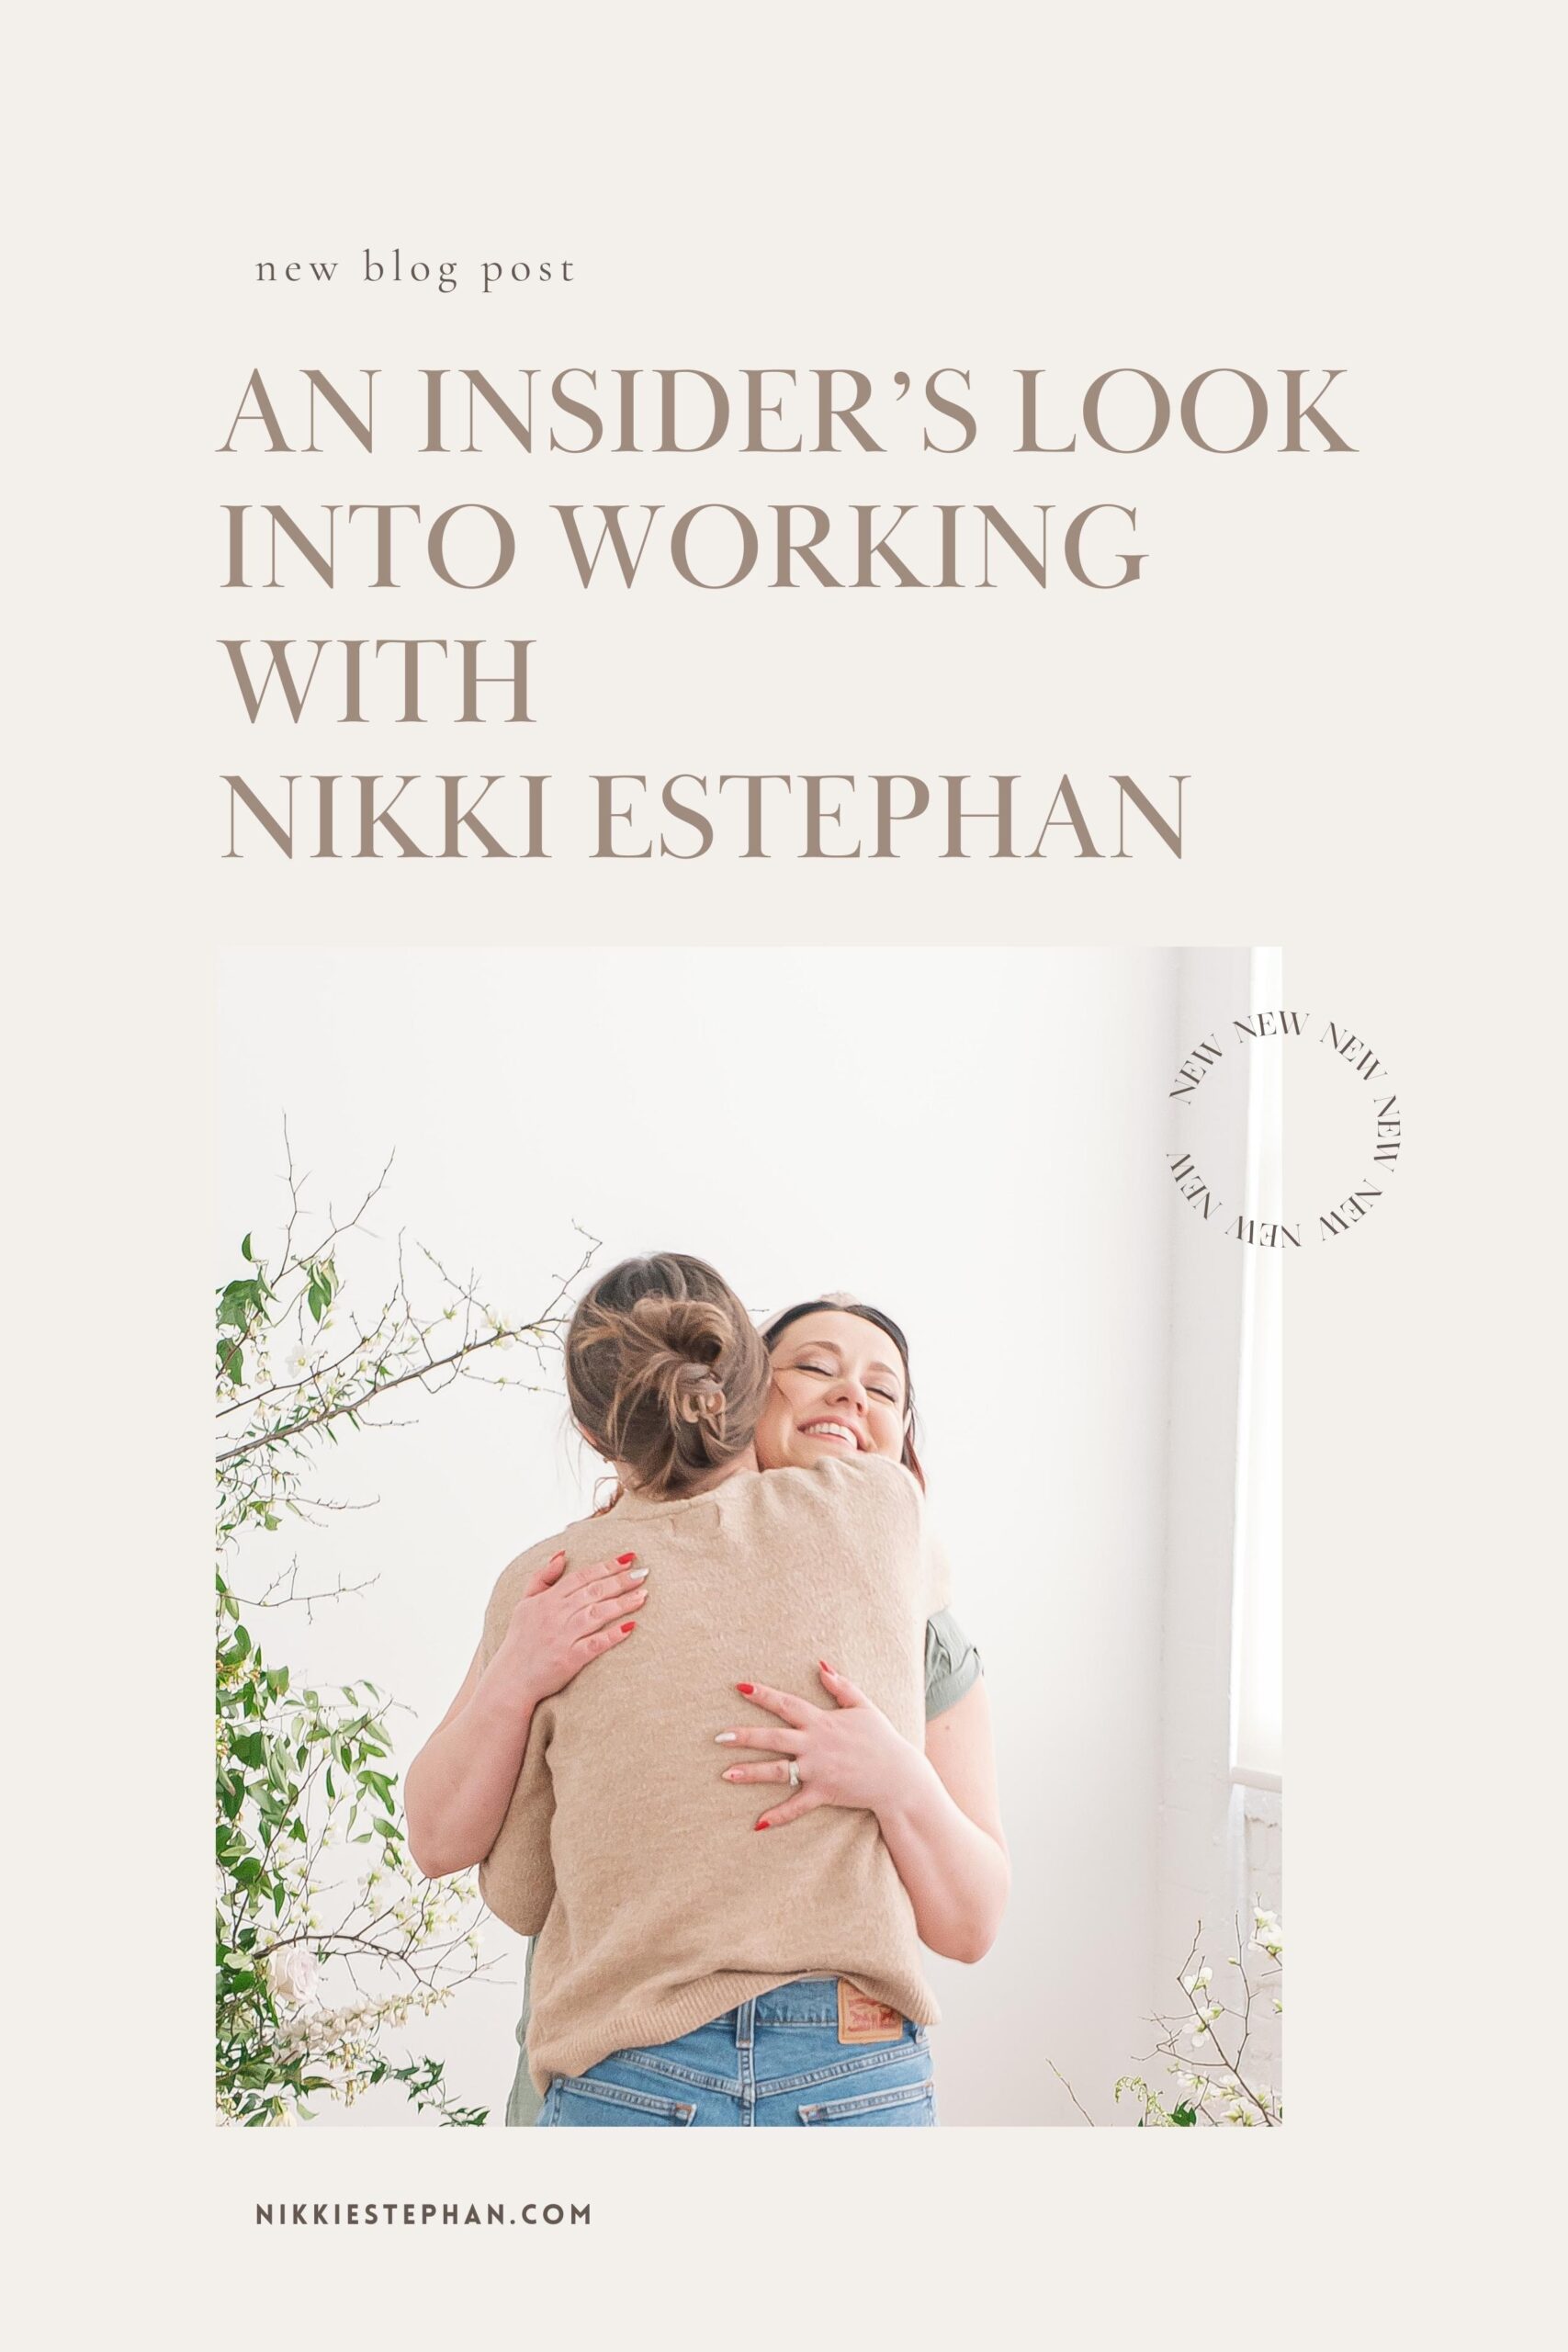 AN INSIDER’S LOOK INTO WORKING WITH NIKKI ESTEPHAN